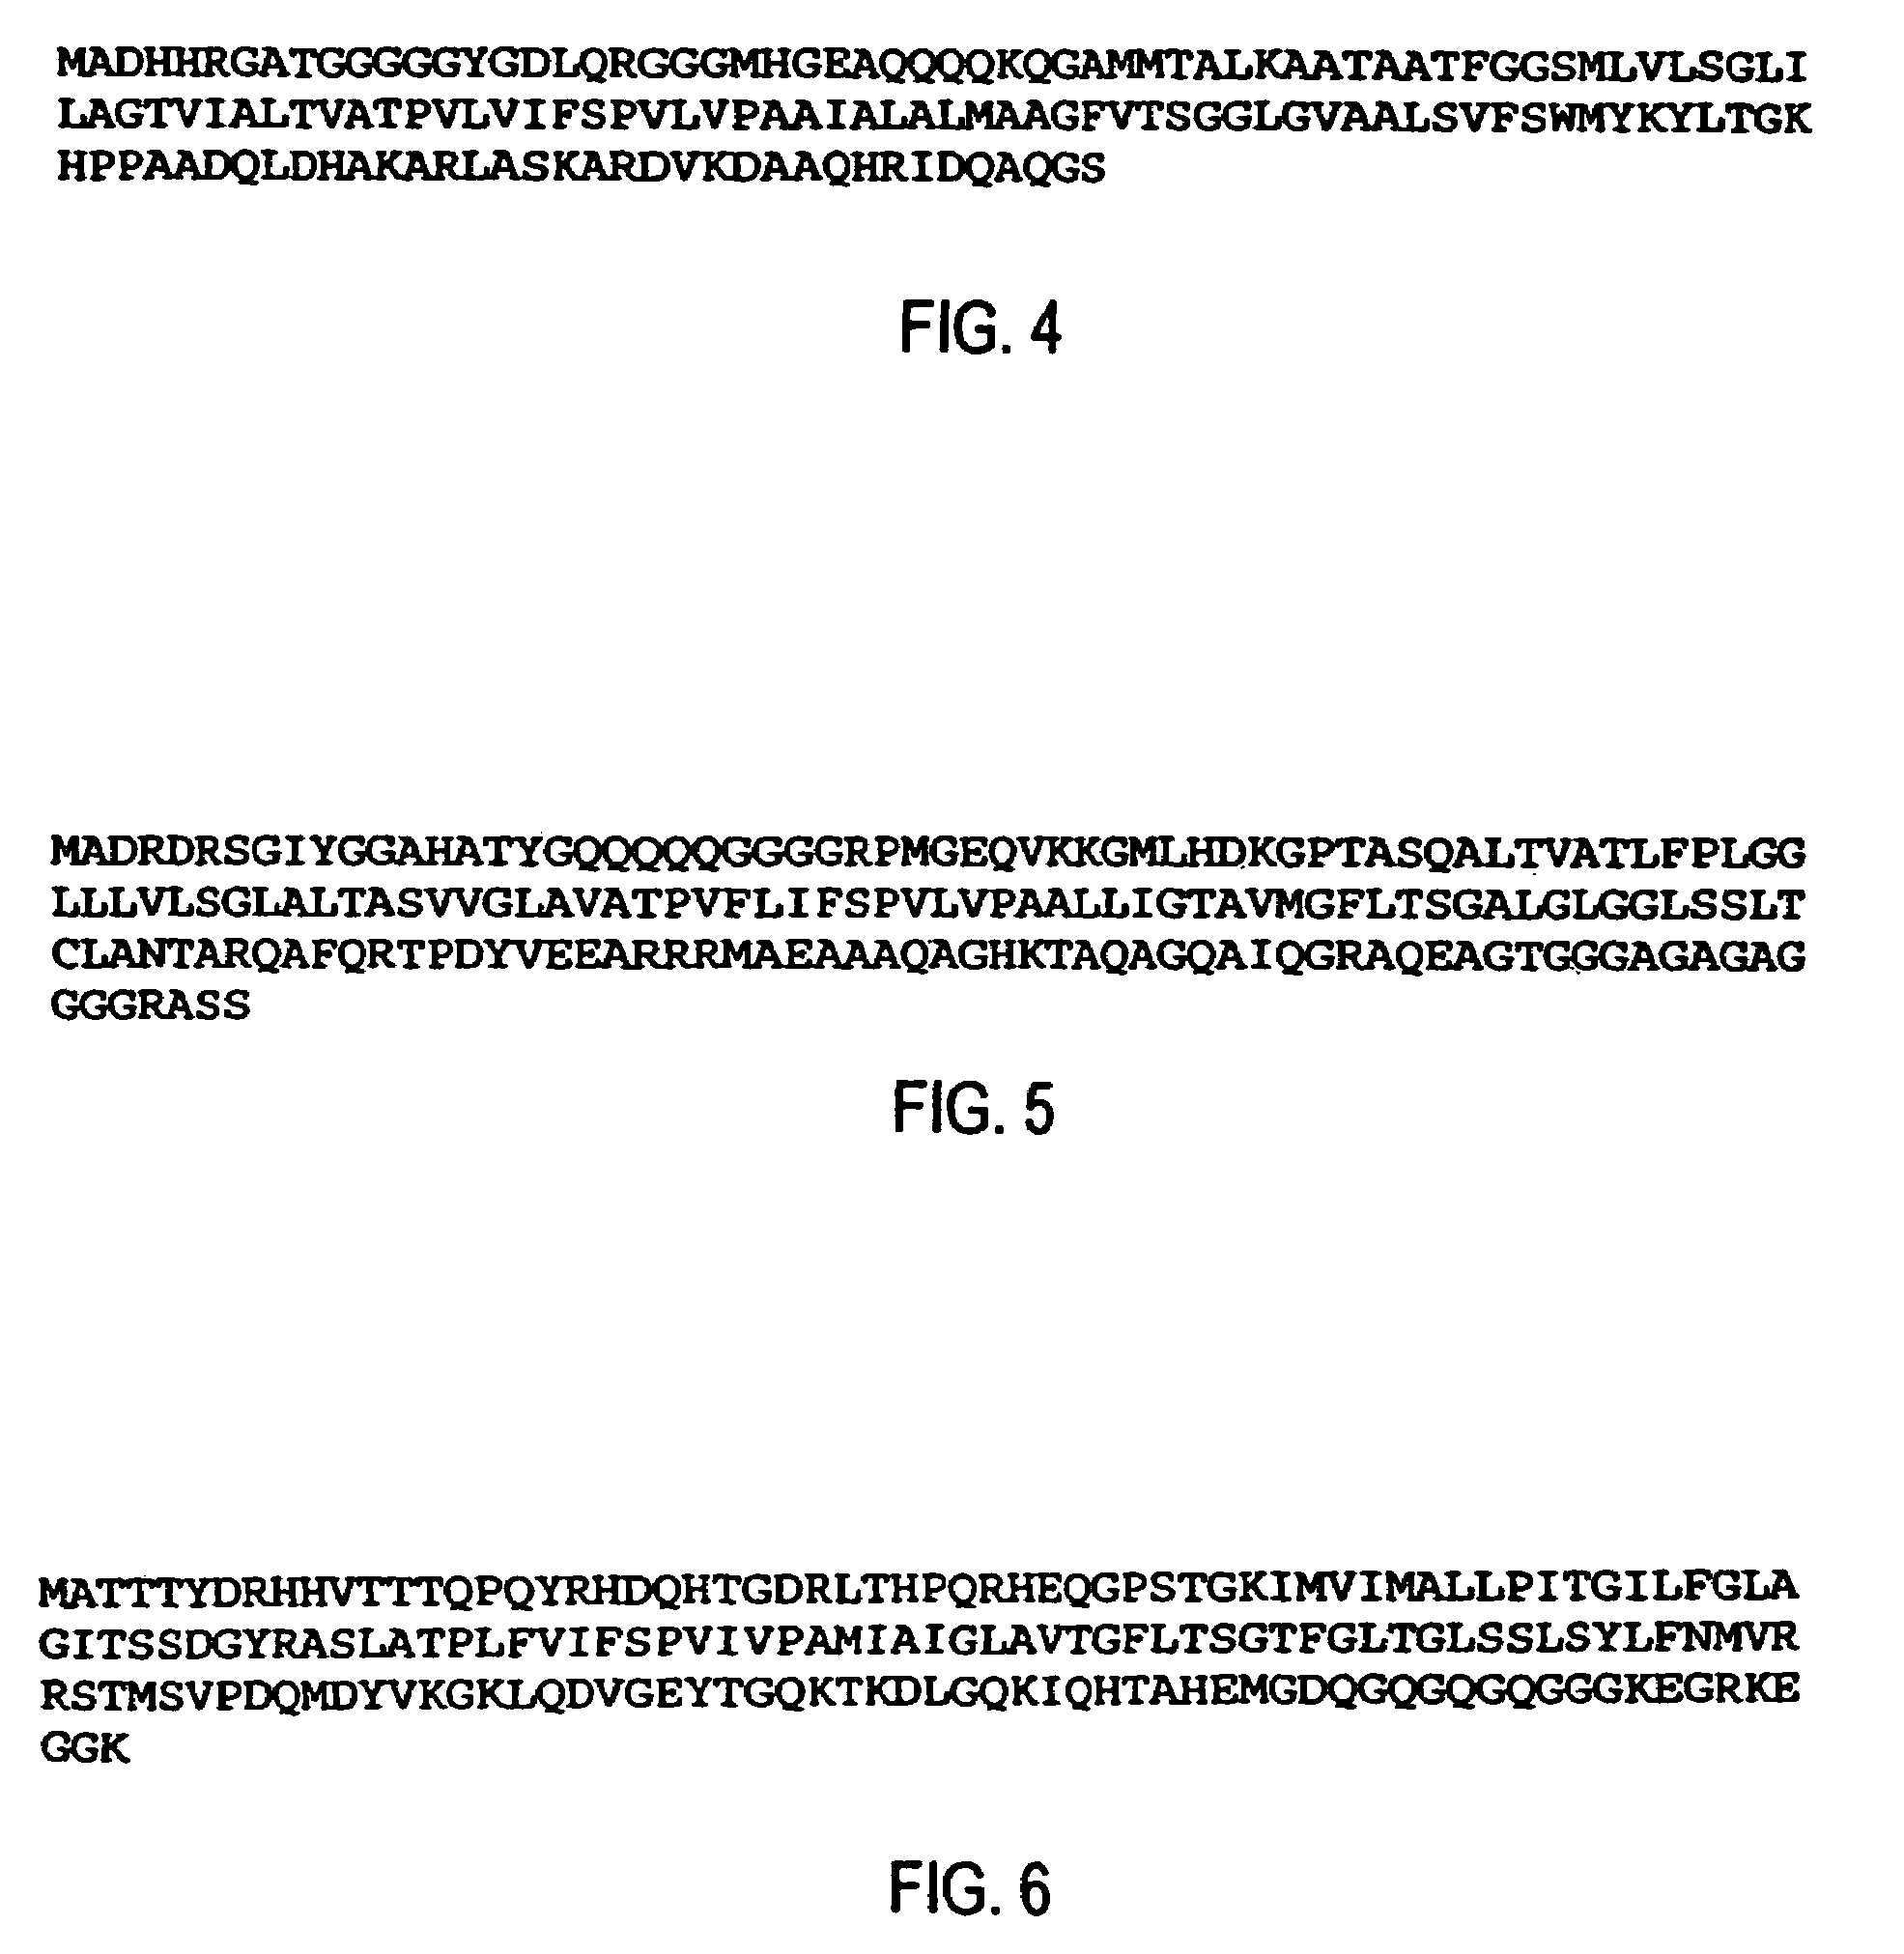 Oil body associated protein compositions and methods of use thereof for reducing the risk of cardiovascular disease